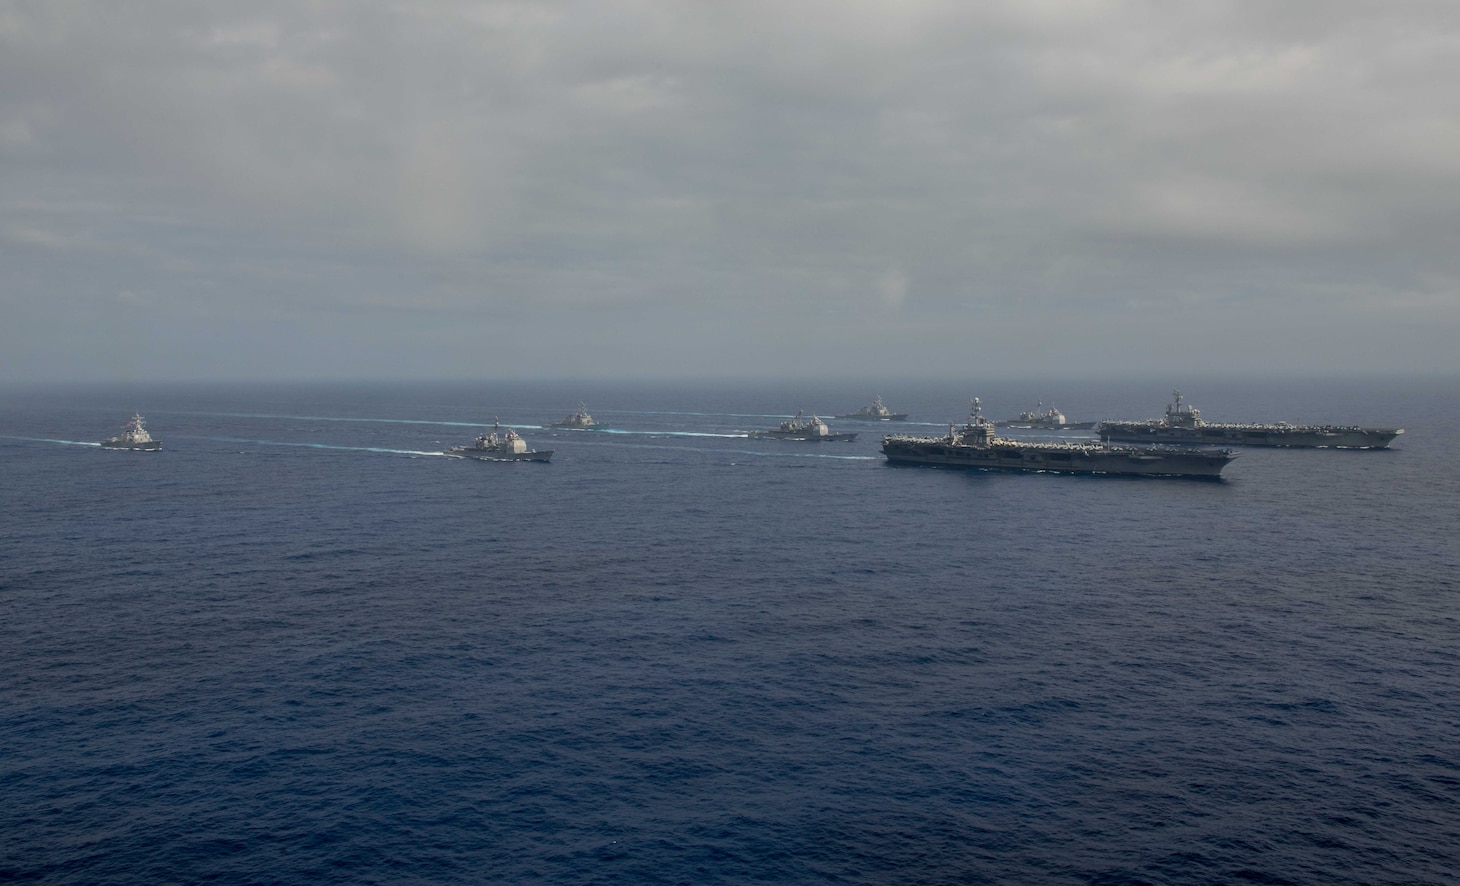 PHILLIPINE SEA (June 18, 2016) - The Nimitz-class aircraft carriers USS John C. Stennis (CVN 74) and USS Ronald Reagan (CVN 76) conduct dual aircraft carrier strike group operations in the U.S. 7th Fleet area of operations in support of security and stability in the Indo-Asia-Pacific. The operations mark the U.S. Navy’s continued presence throughout the area of responsibility. (U.S. Navy photo by Mass Communication Specialist 3rd Class Jake Greenberg / Released)